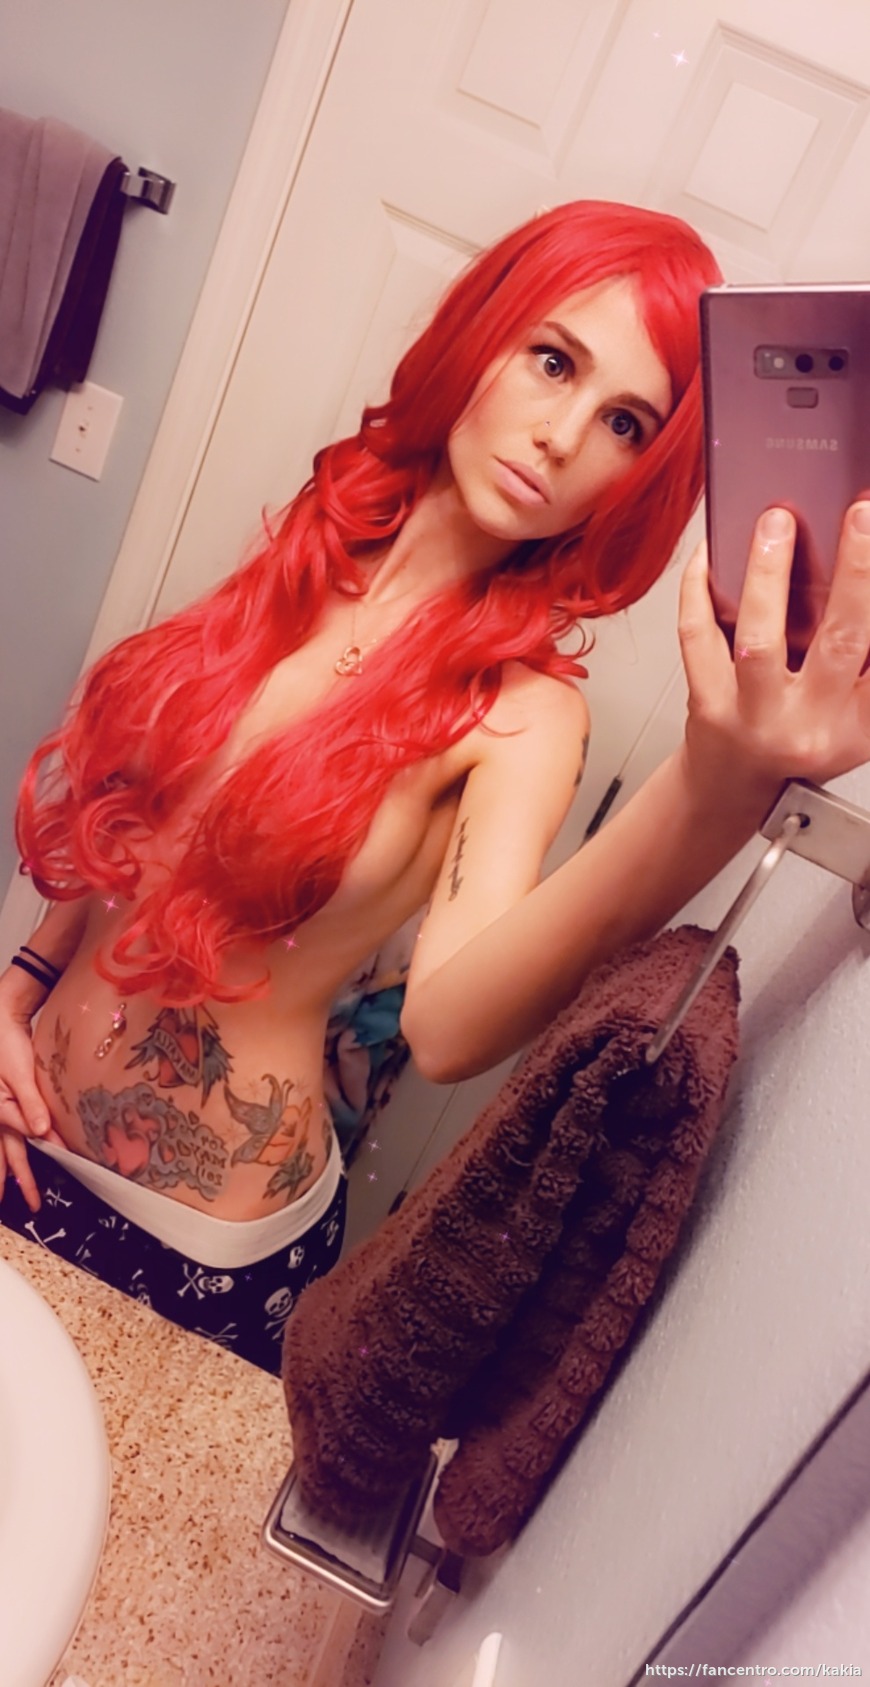 Red hair, dont care - post image